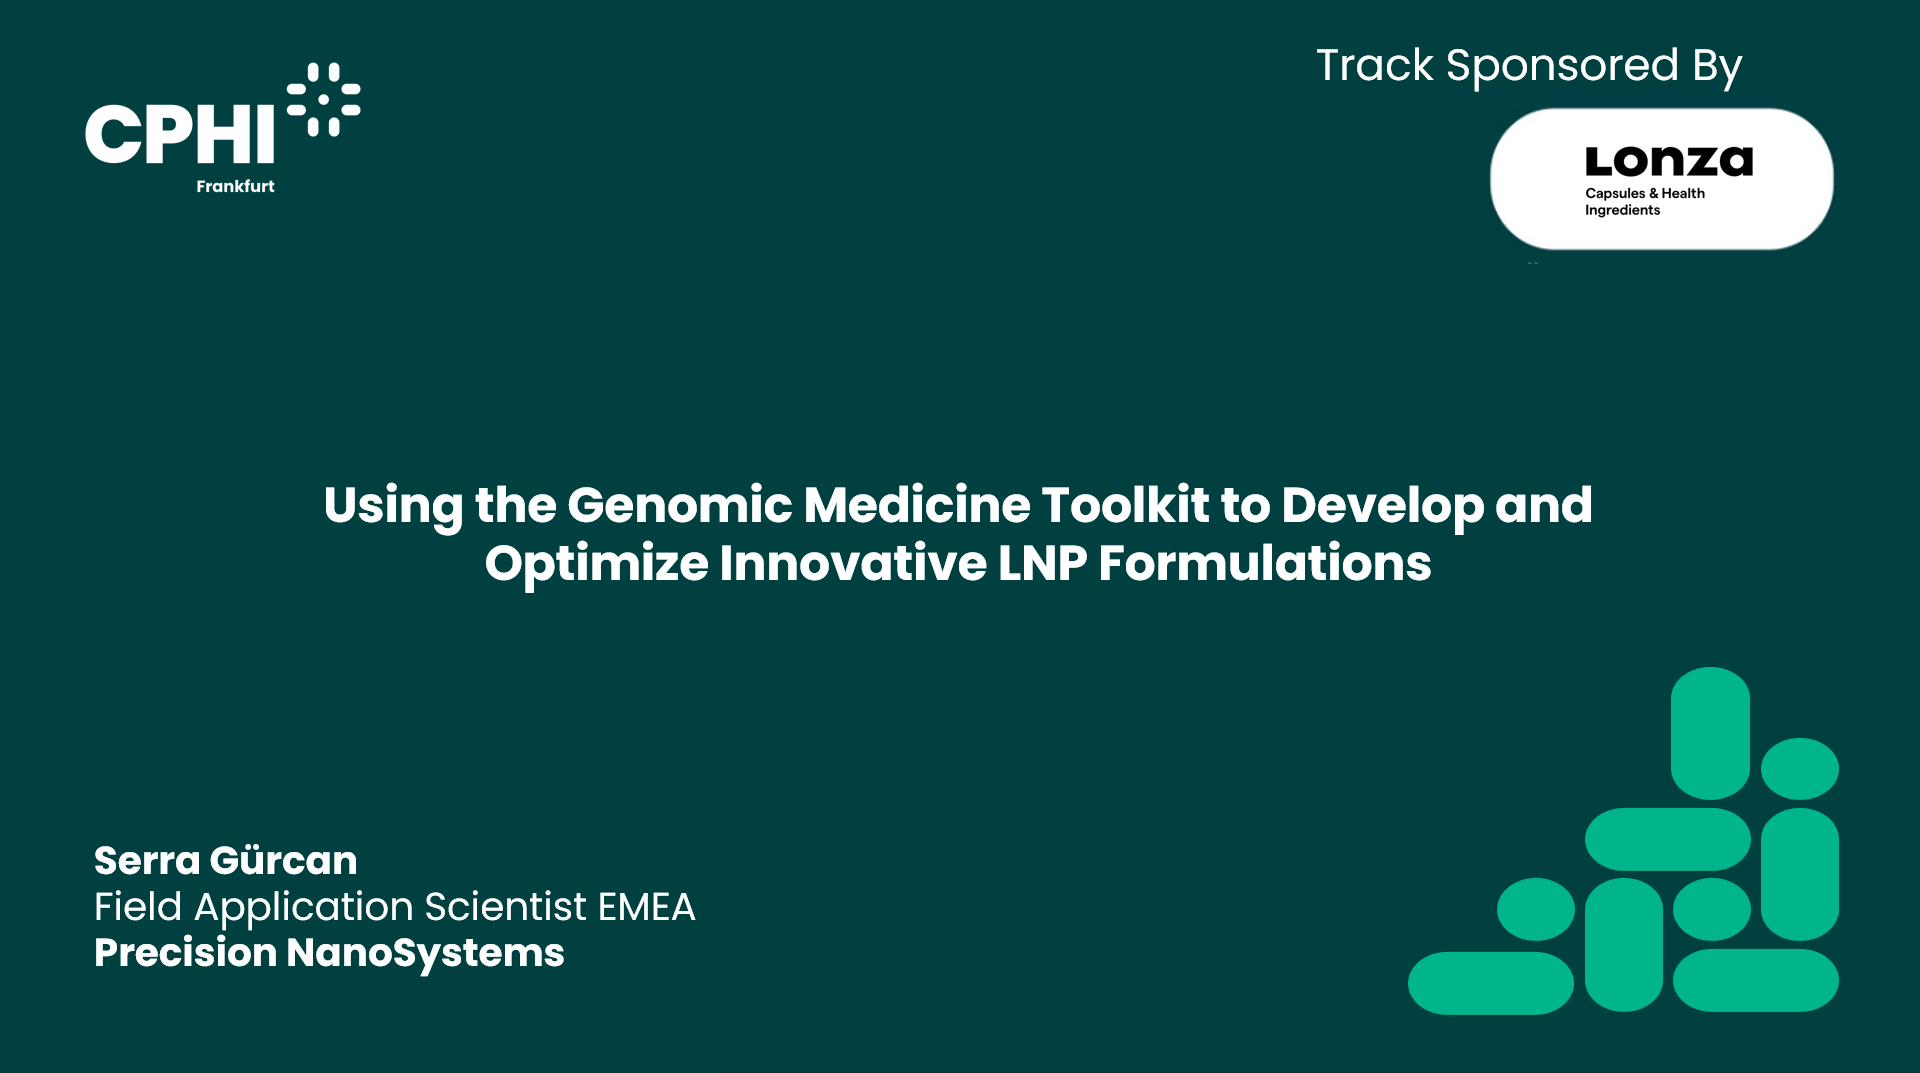 Using the Genomic Medicine Toolkit to Develop and Optimize Innovative LNP Formulations